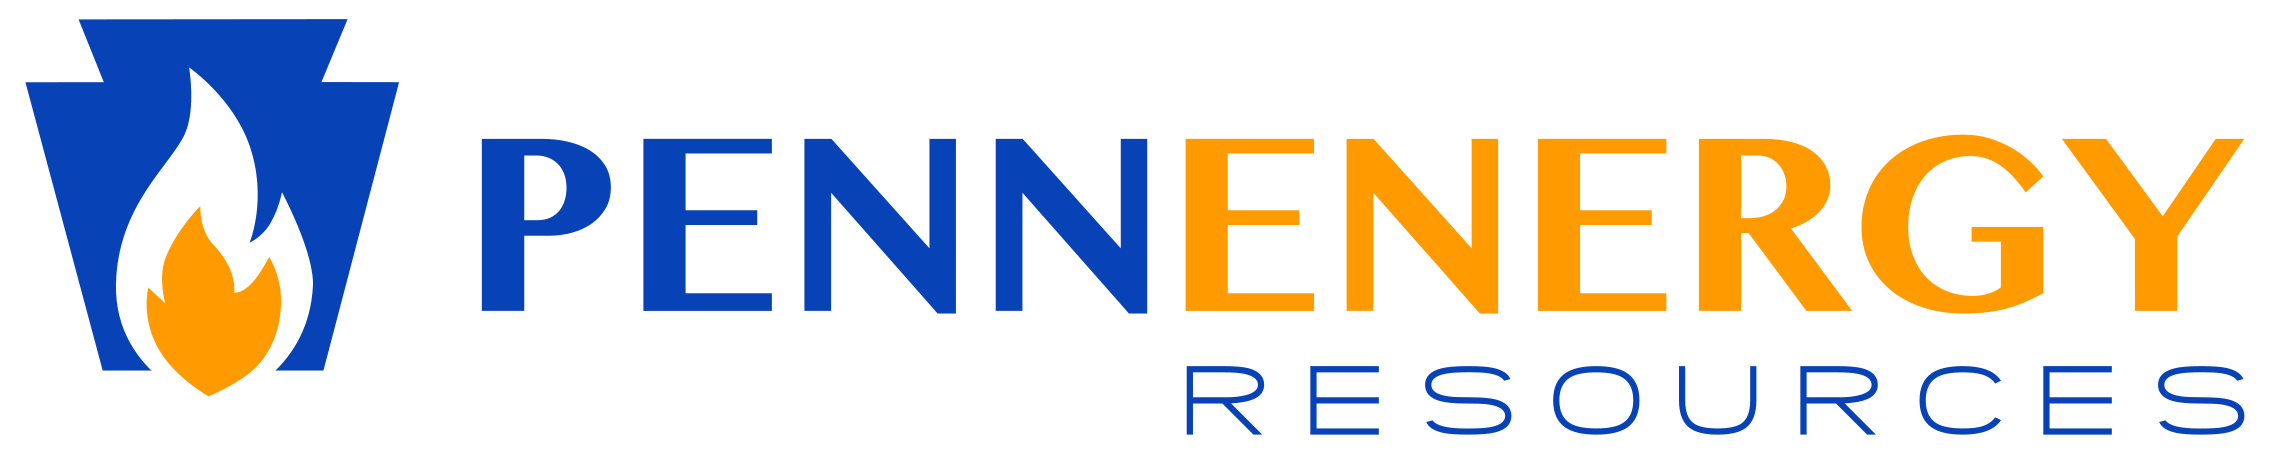 PennEnergy Resources logo